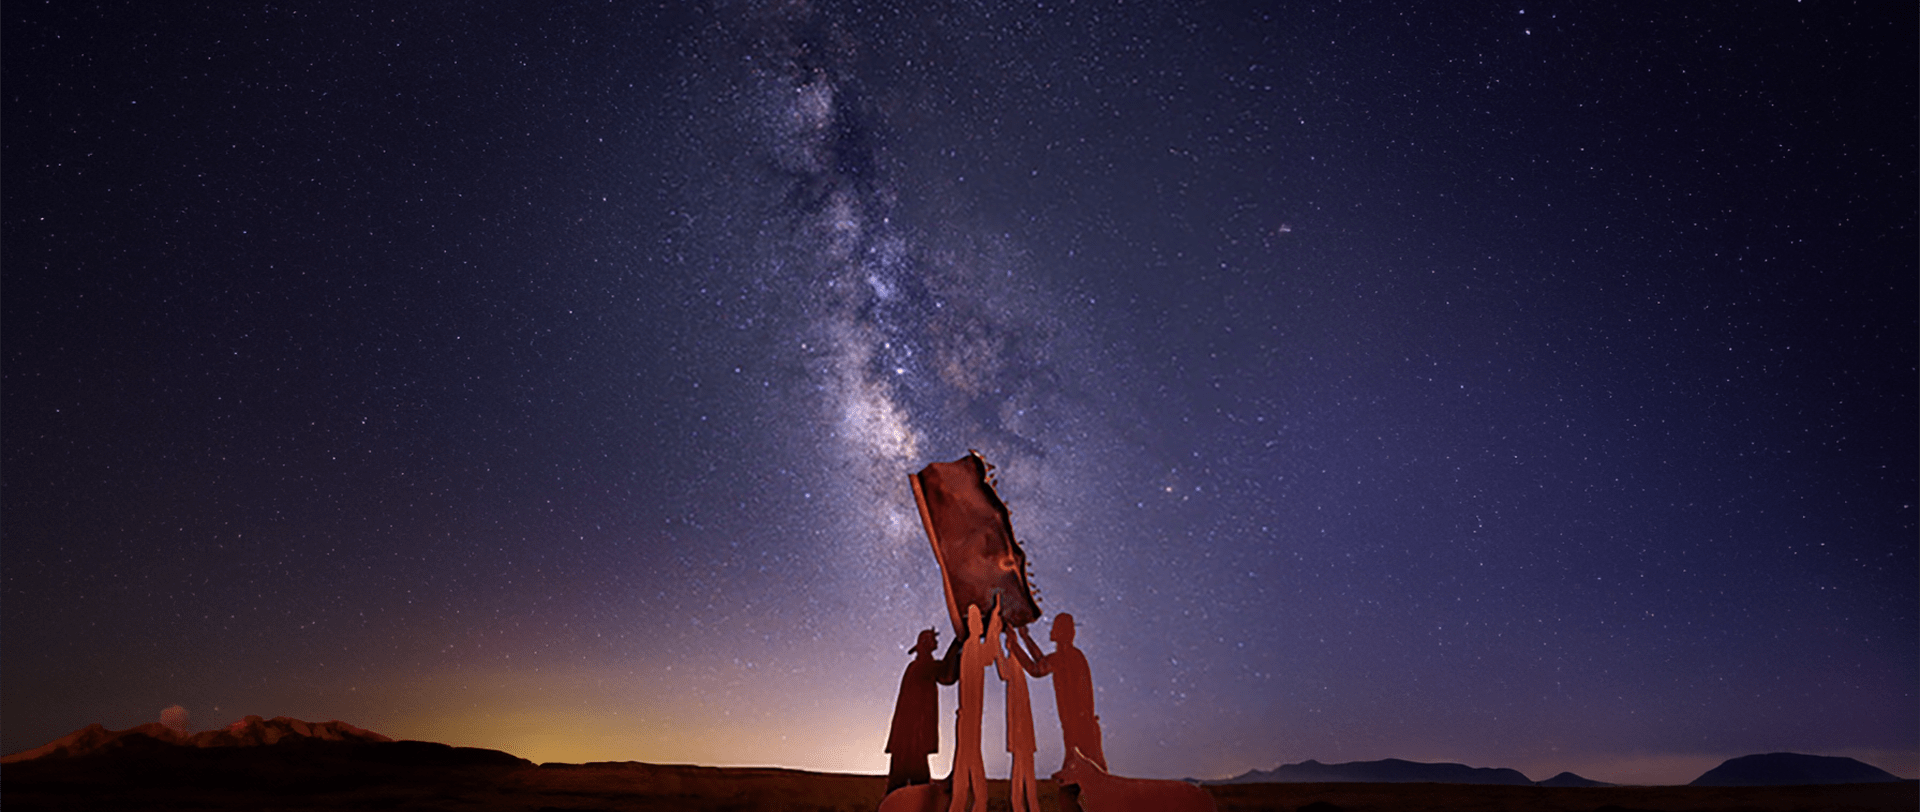 Chino Valley Memorial timelapse photo with the milky way clearly visible